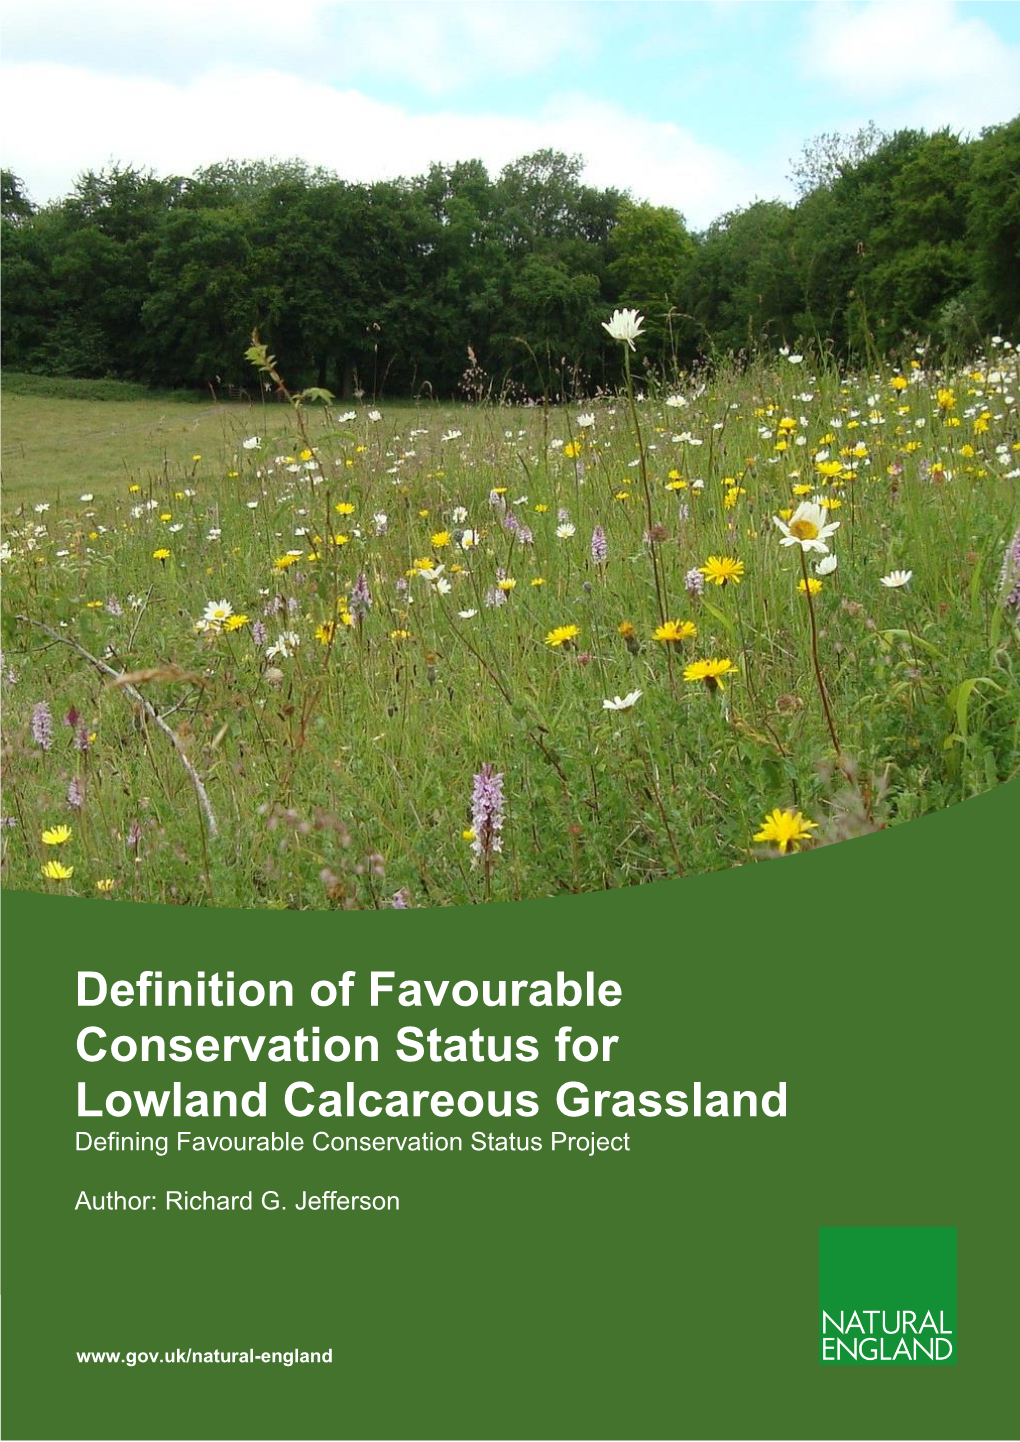 Definition of Favourable Conservation Status for Lowland Calcareous